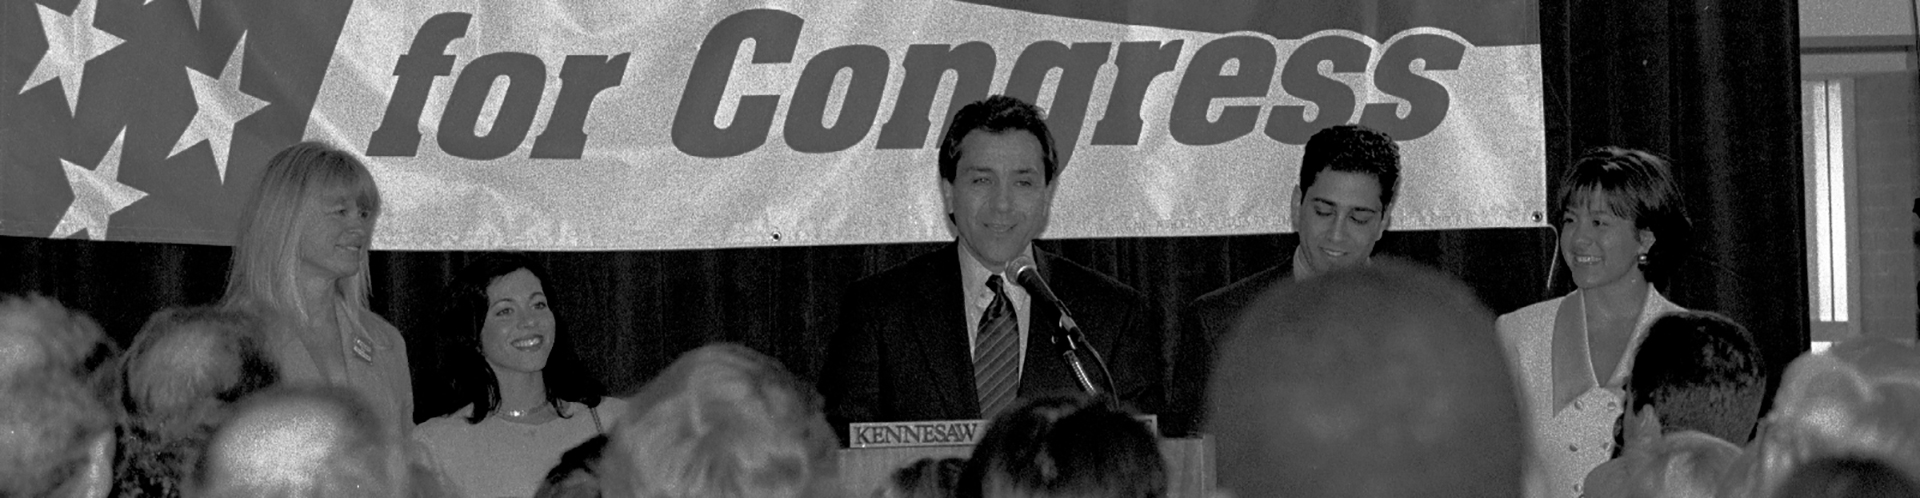 Michael Coles during his bid for government office